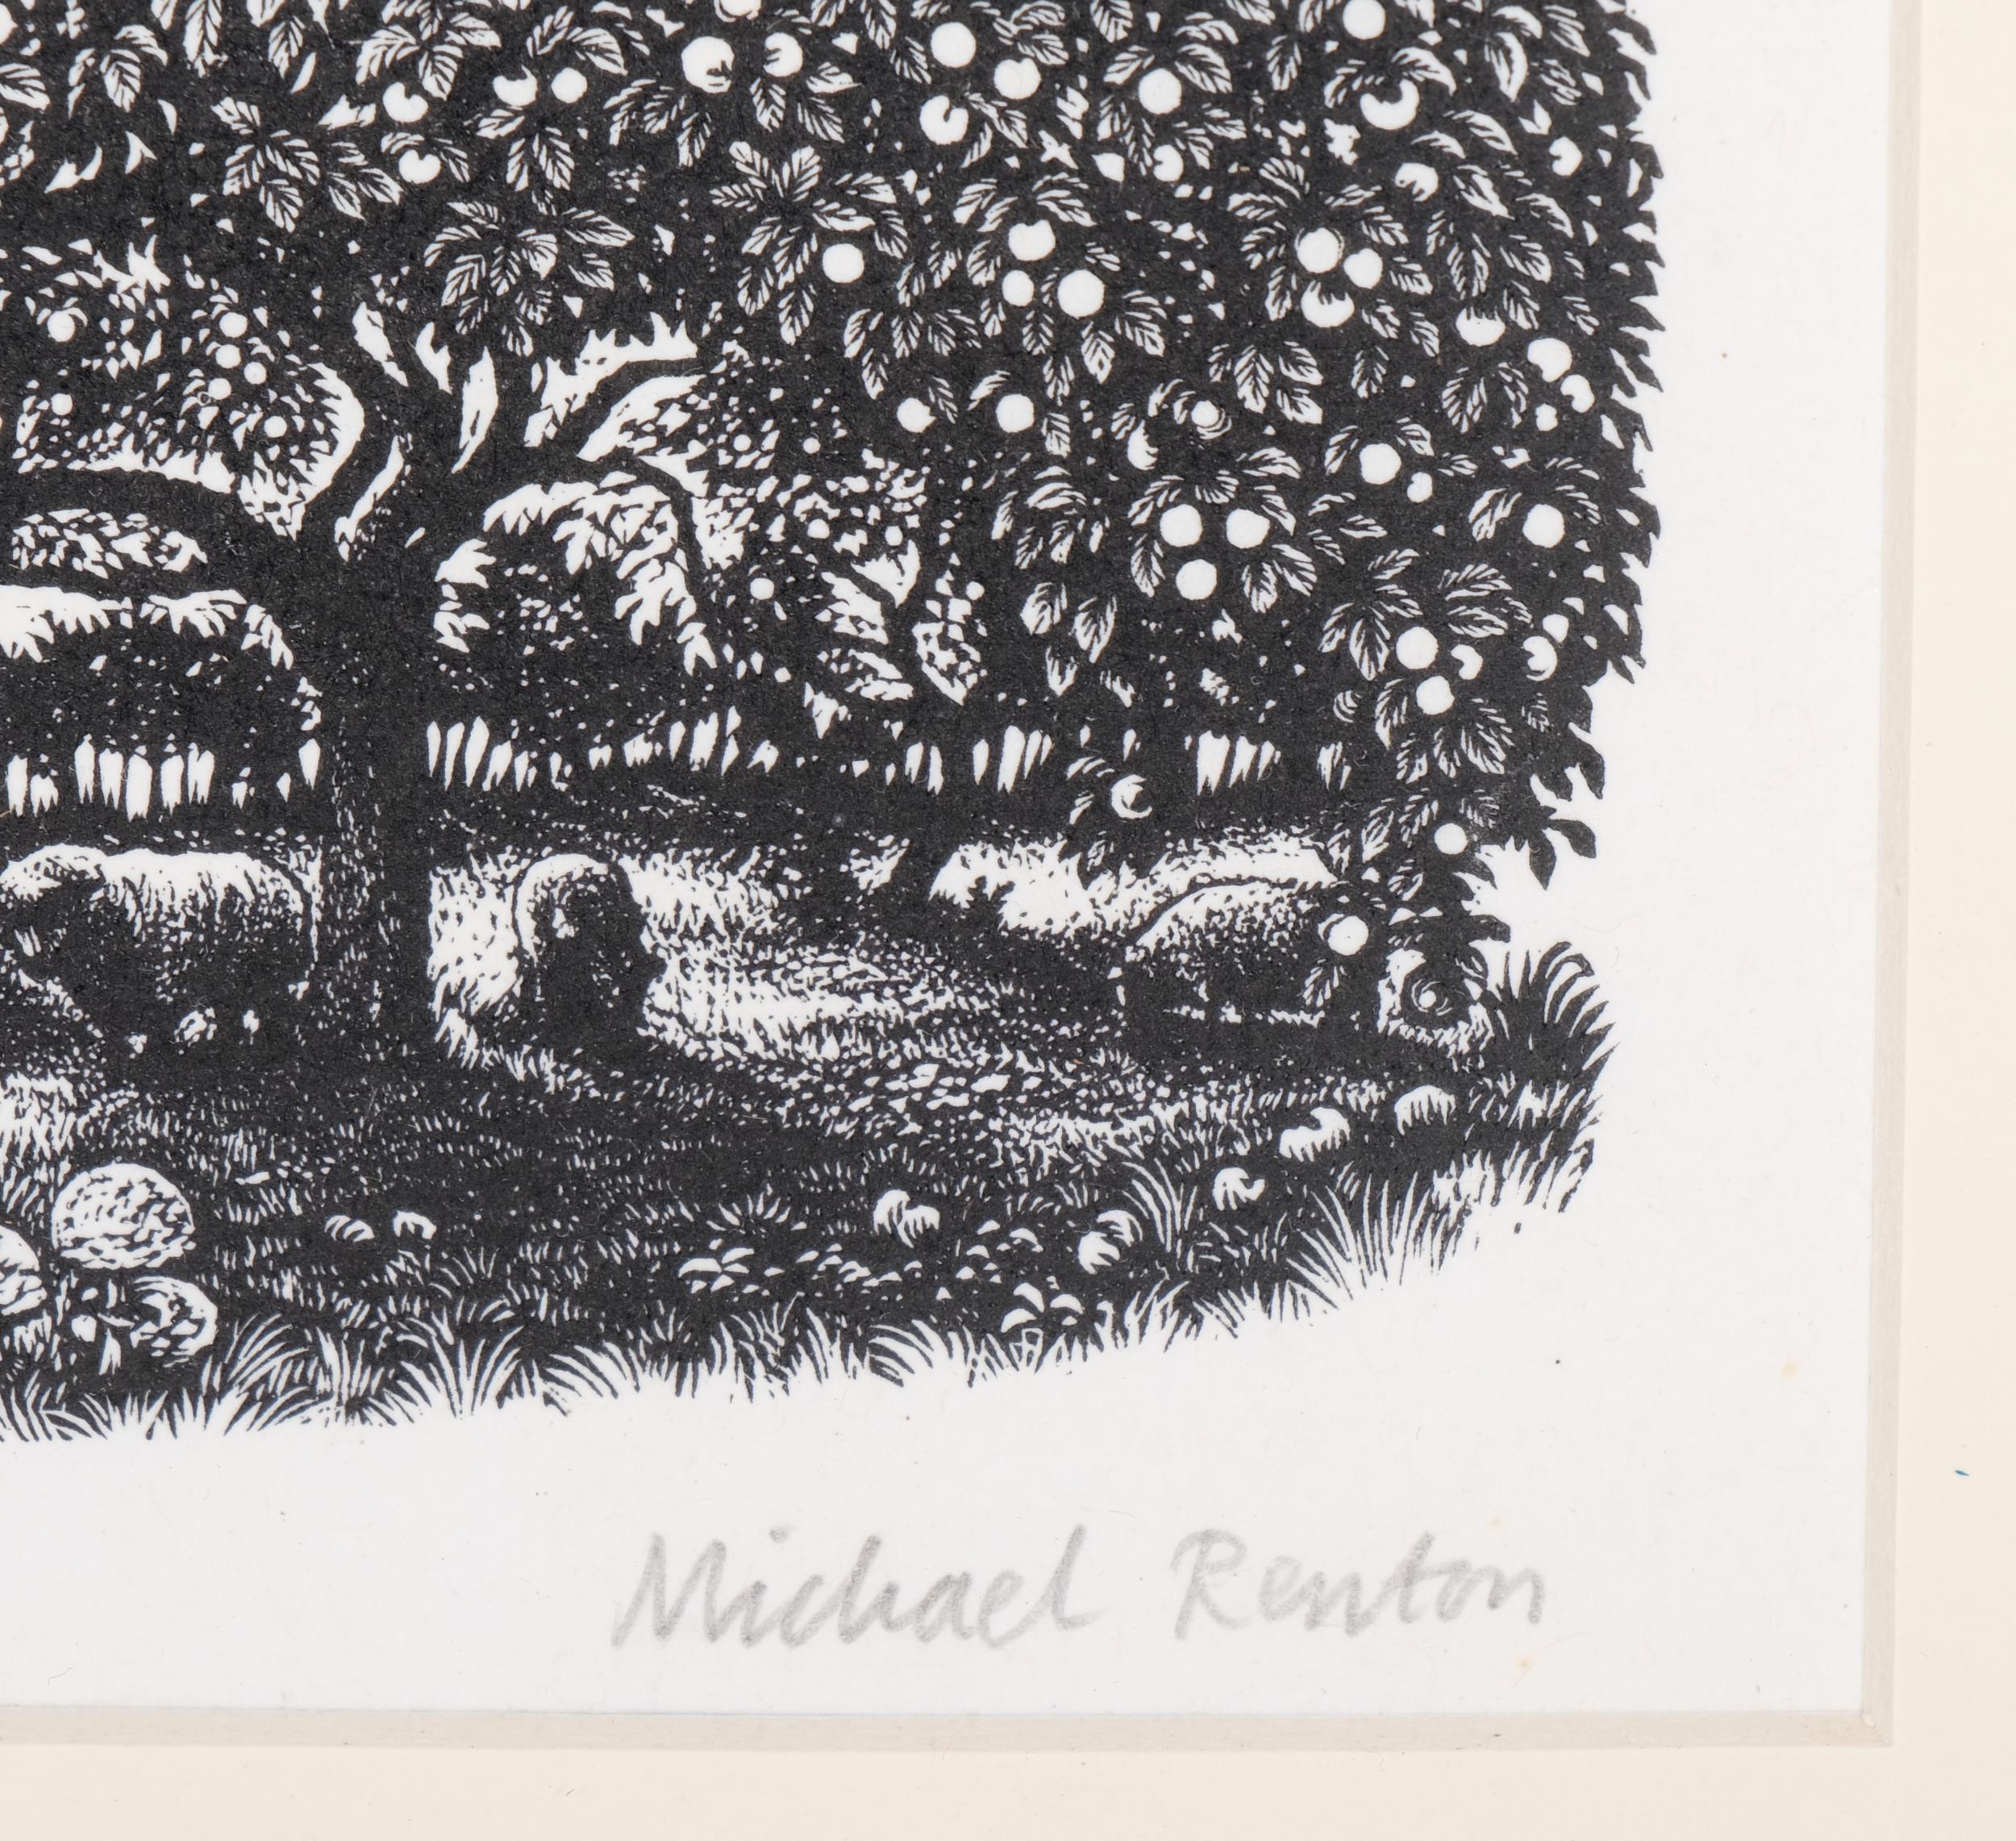 Michael Renton (1934-2001), limited edition wood engraving on paper, Apple Trees, 11cm x 18cm, - Image 3 of 4